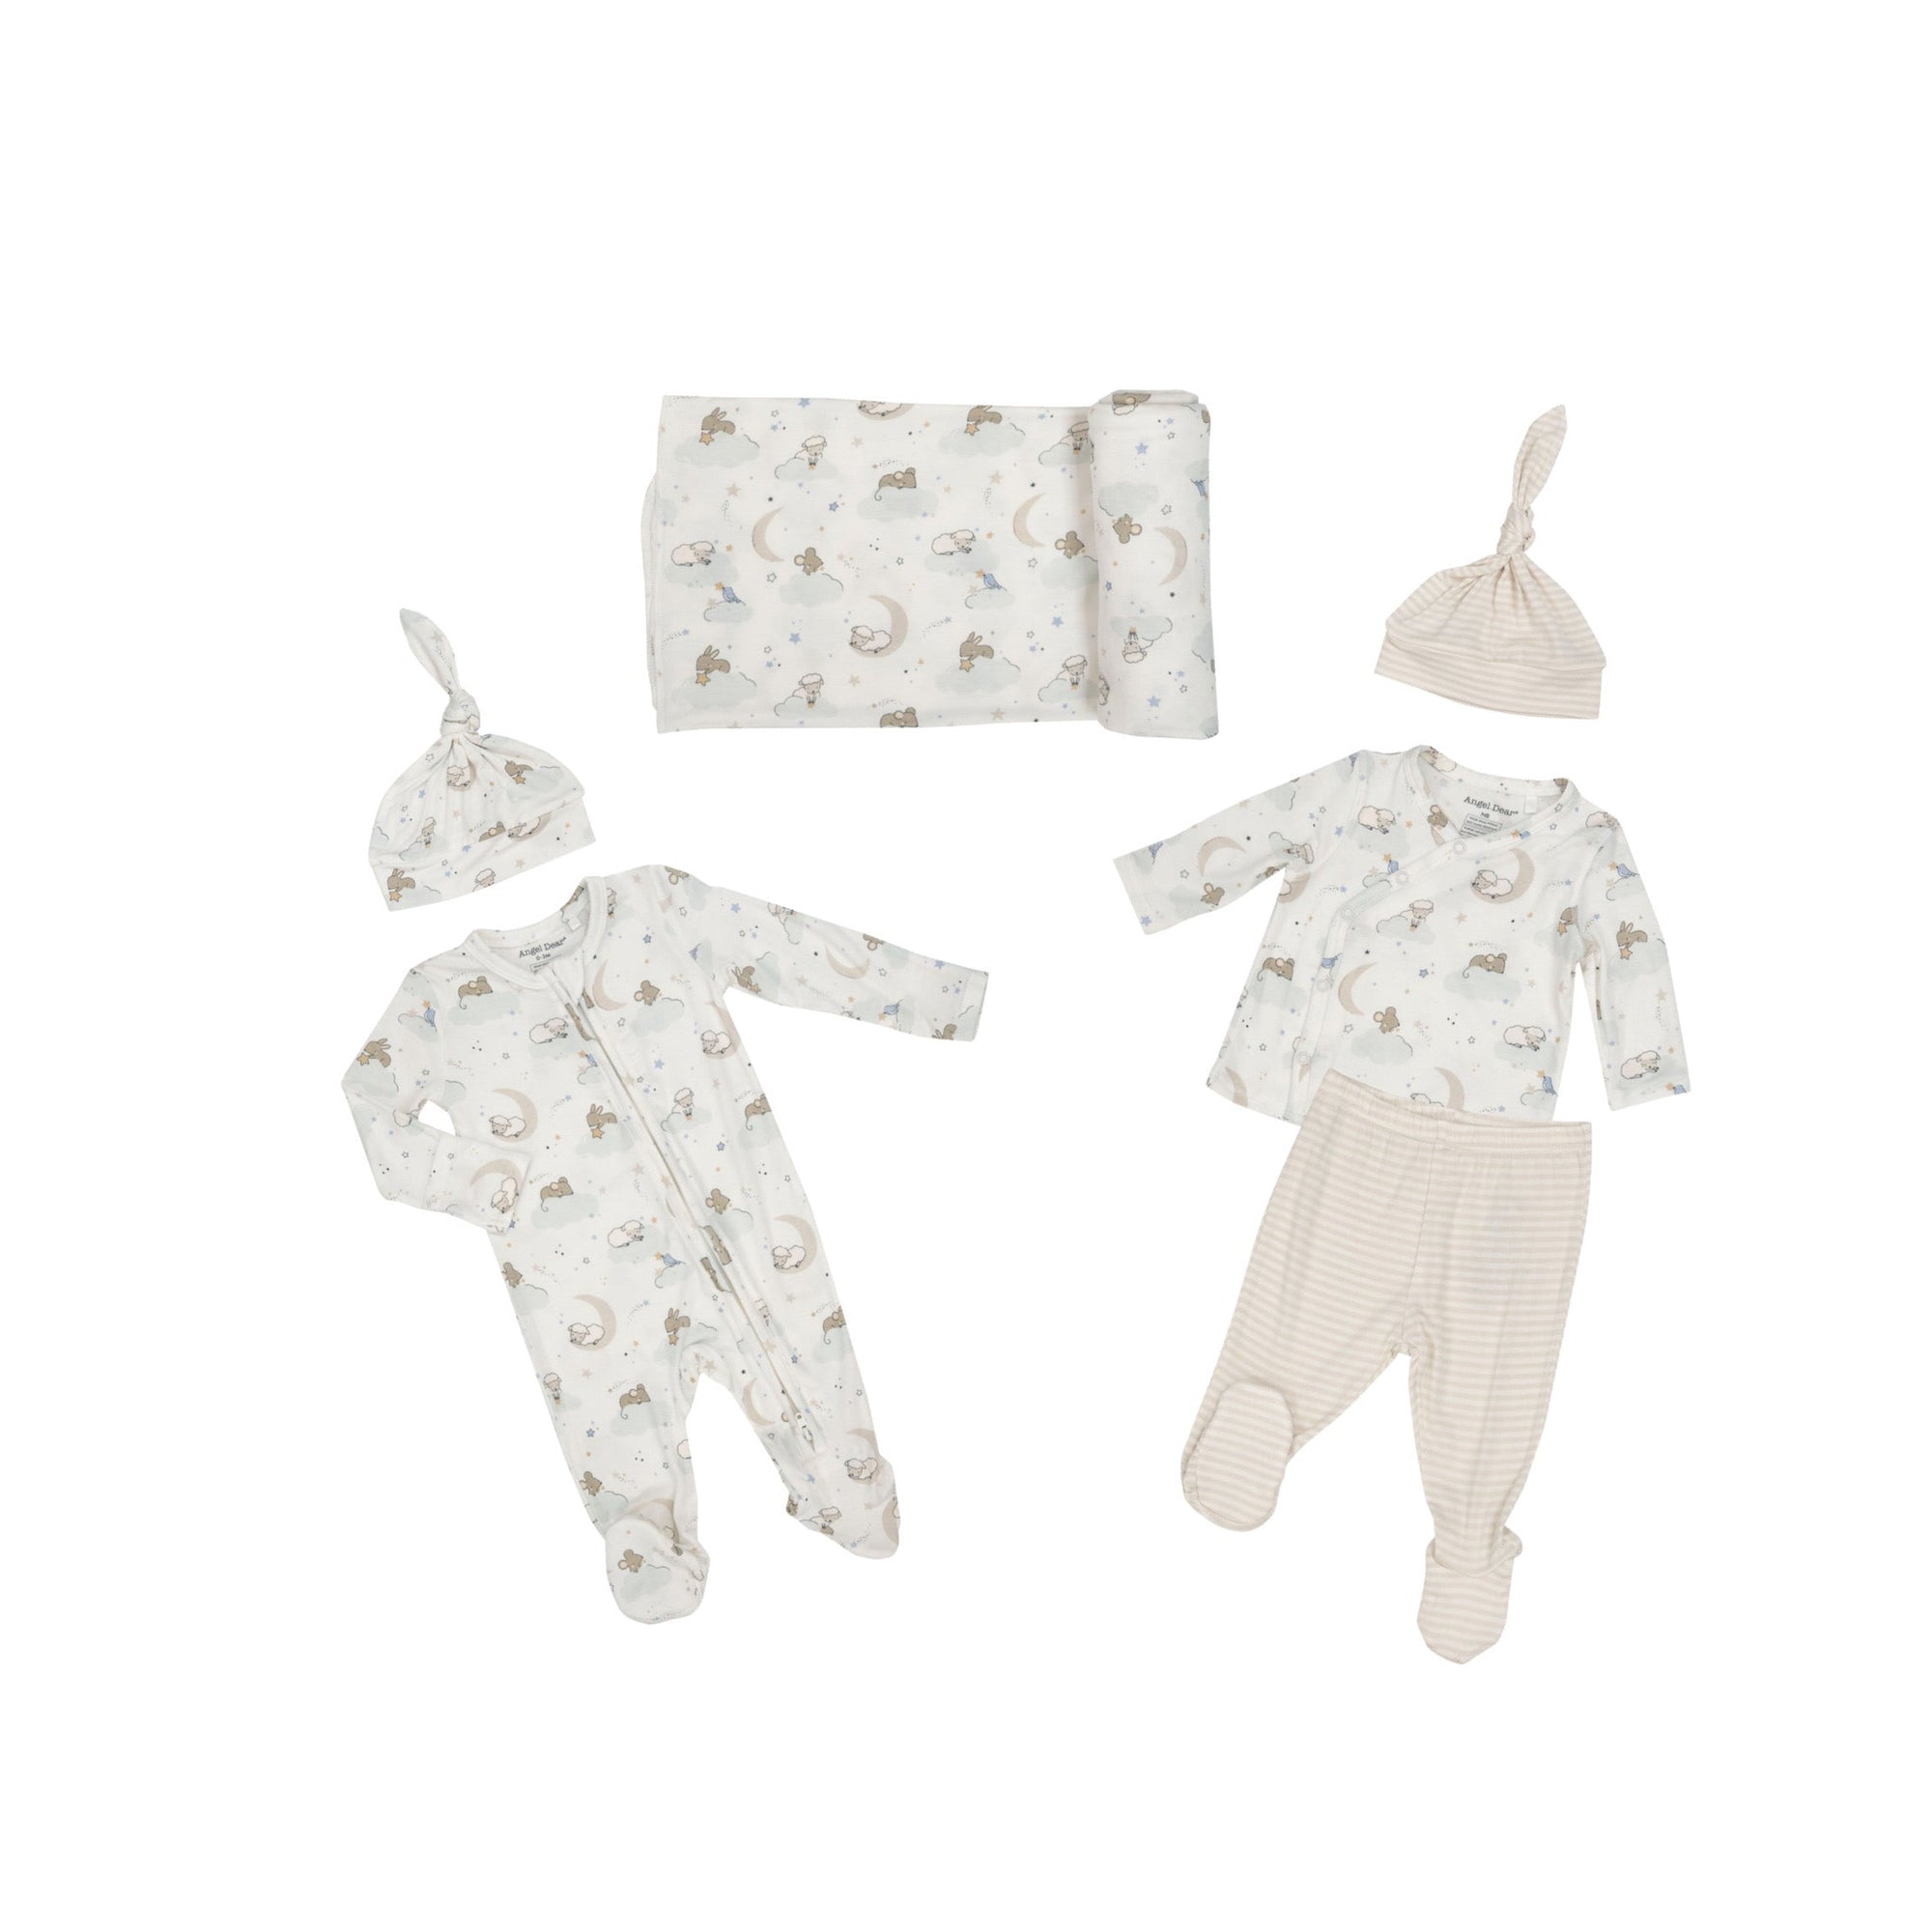 Dreamtime Animals Print Bamboo Footie